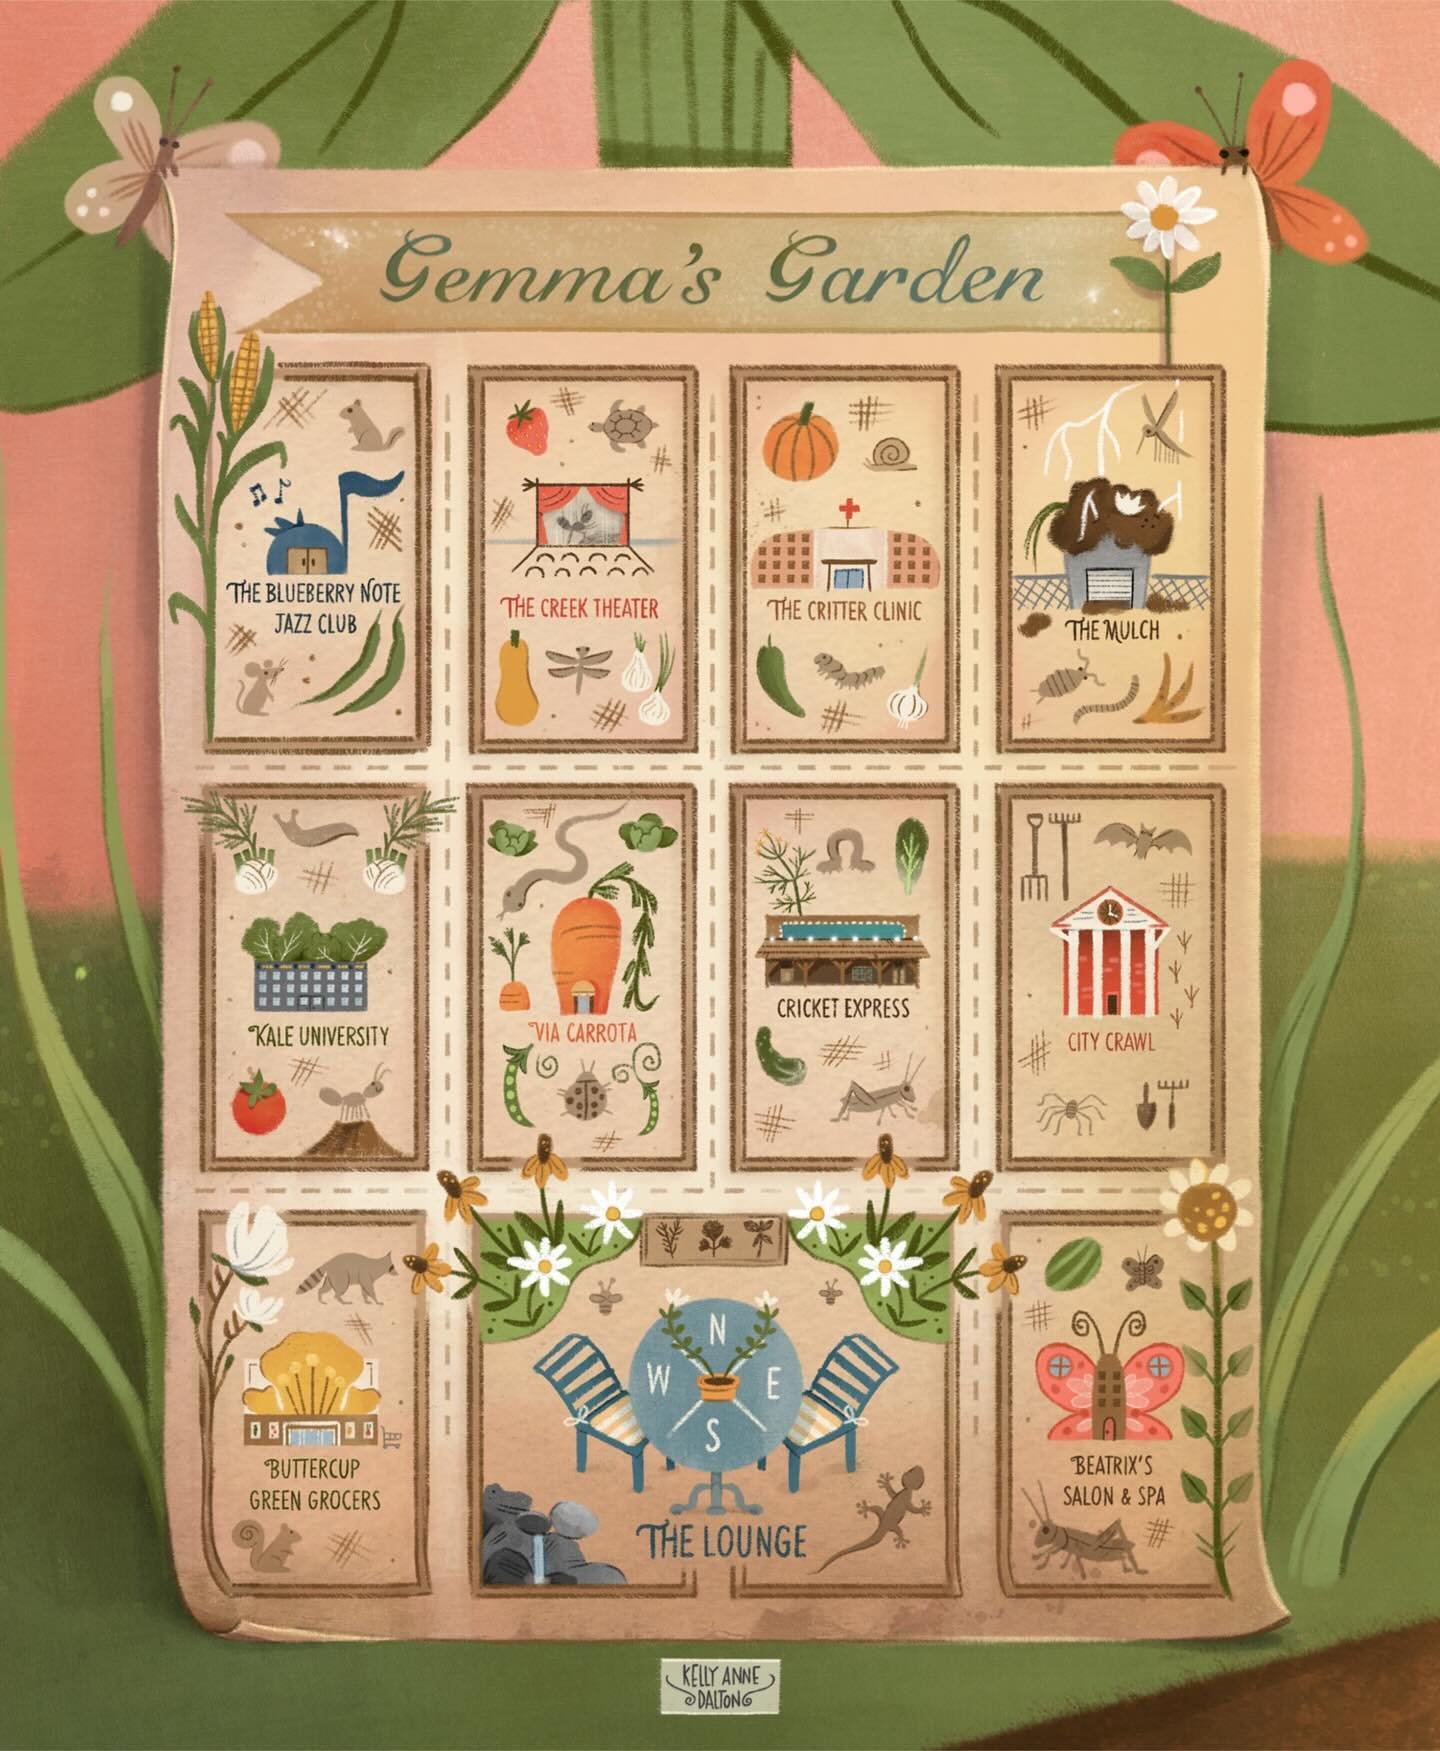 Where will the next adventure be? 🤔

Gemma&rsquo;s Garden Map from Addie Ant Goes on an Adventure ❤️🐜 Swipe to see the authors&rsquo; notes and map details ✏️ 

A picture book is a duet between words and images- both co-creating a magical experienc